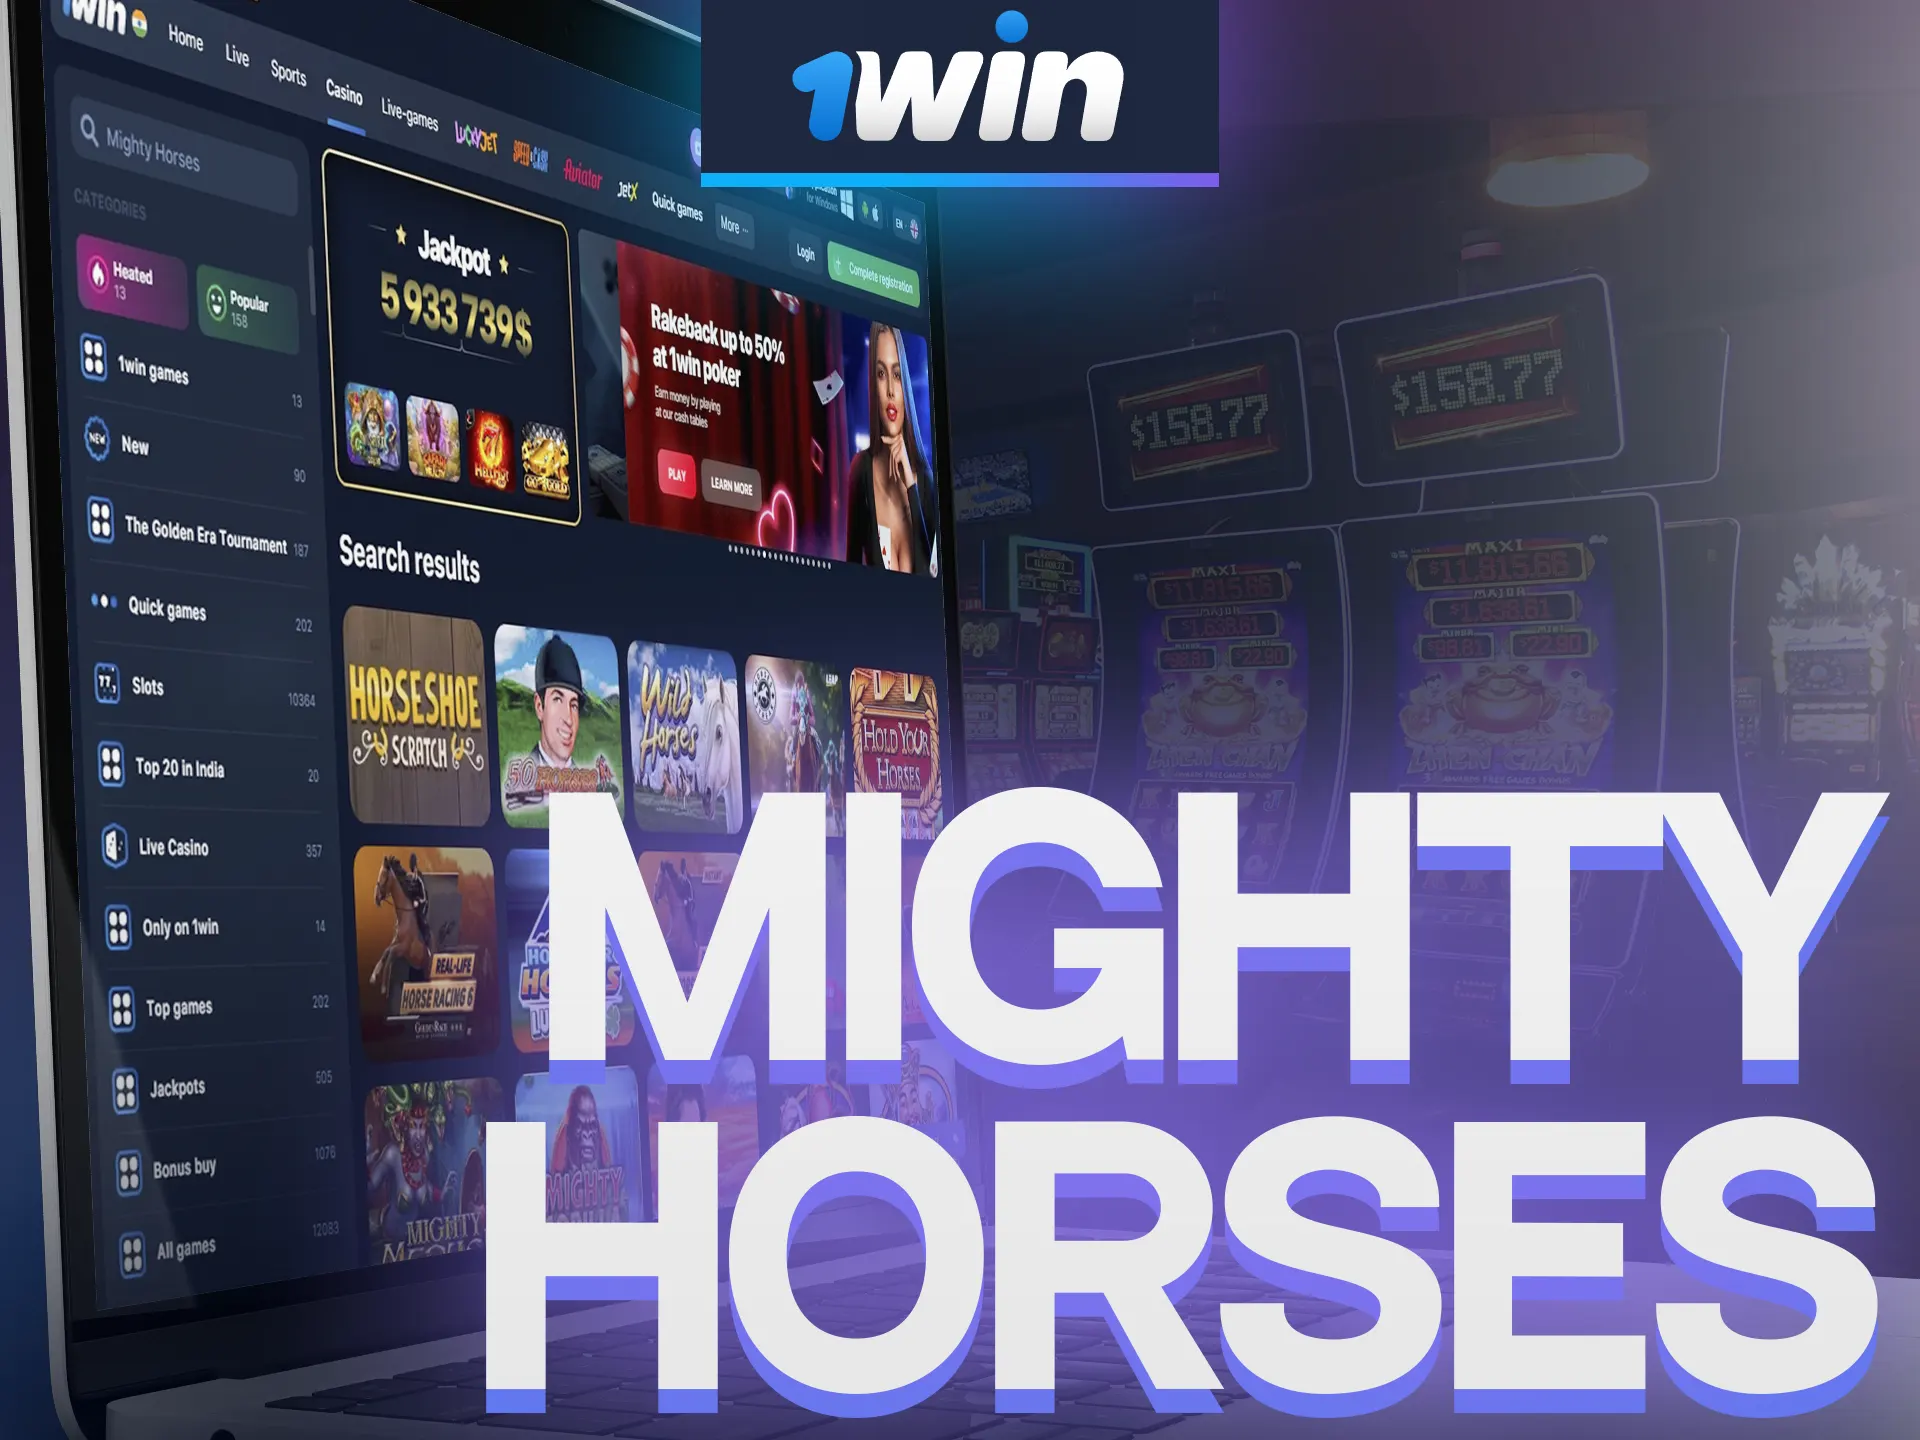 With 1Win, play Mighty Horses.